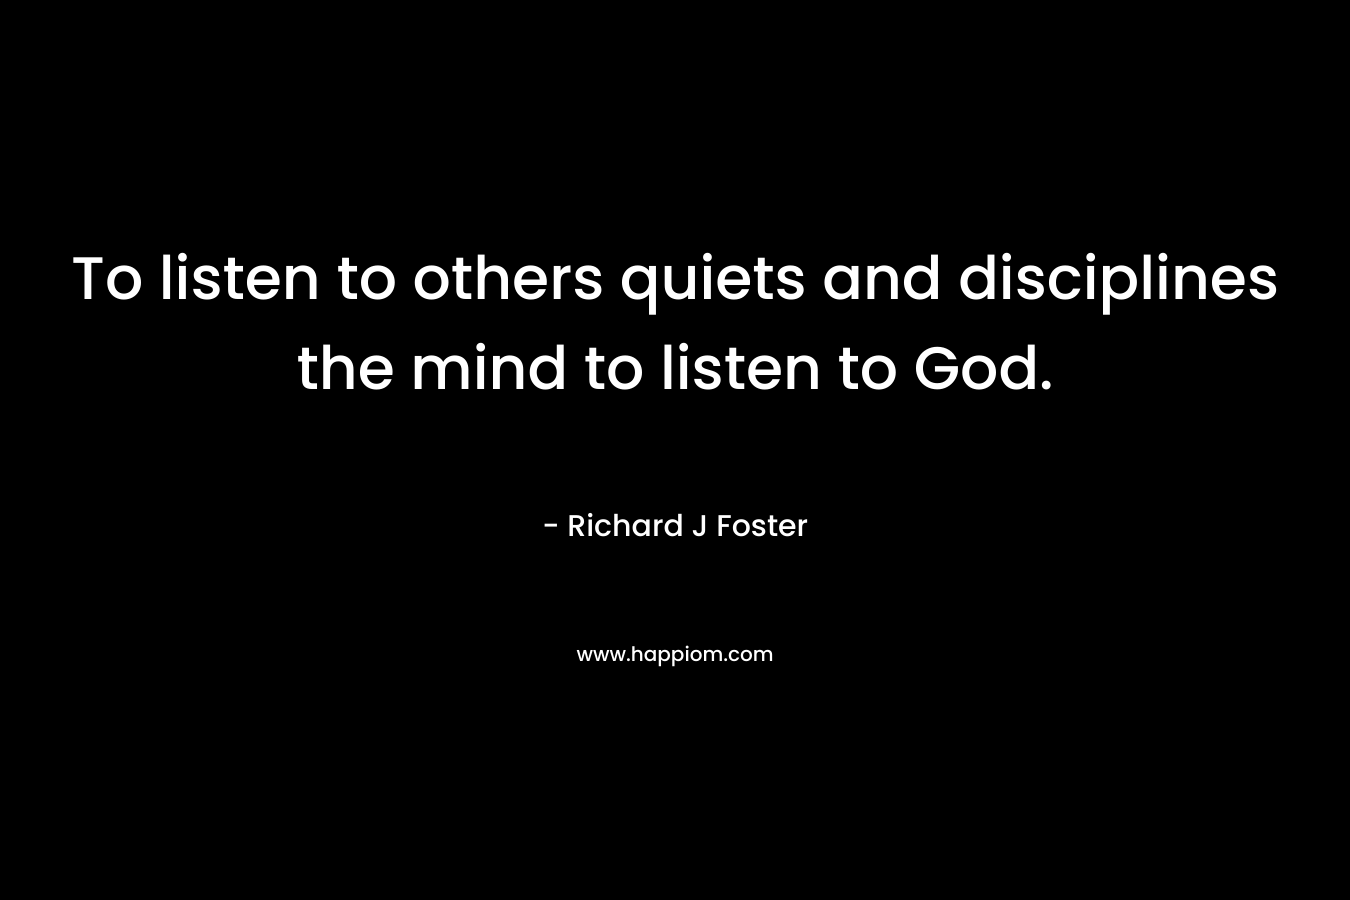 To listen to others quiets and disciplines the mind to listen to God.